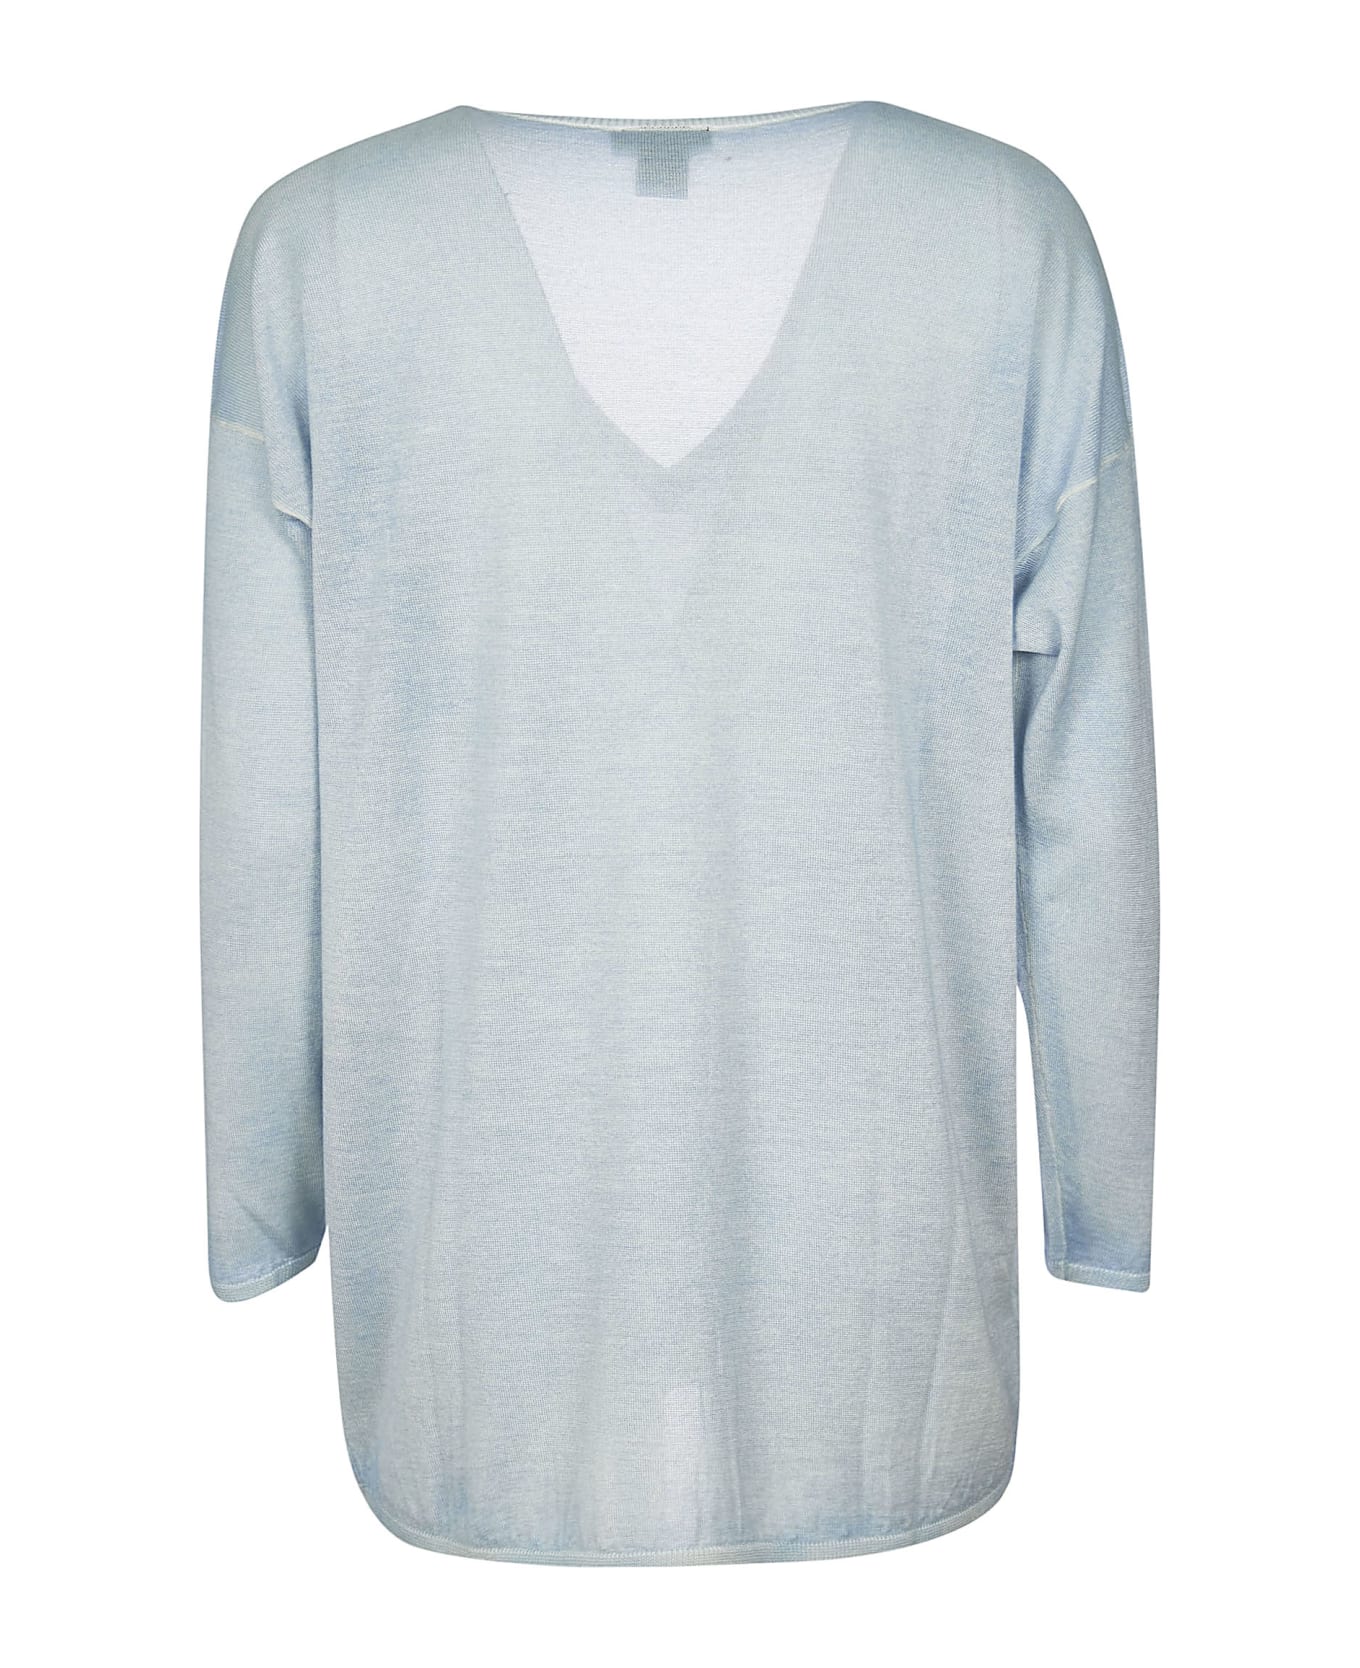 Avant Toi Over Off Gauge Hand Painted Sweater - Chambray